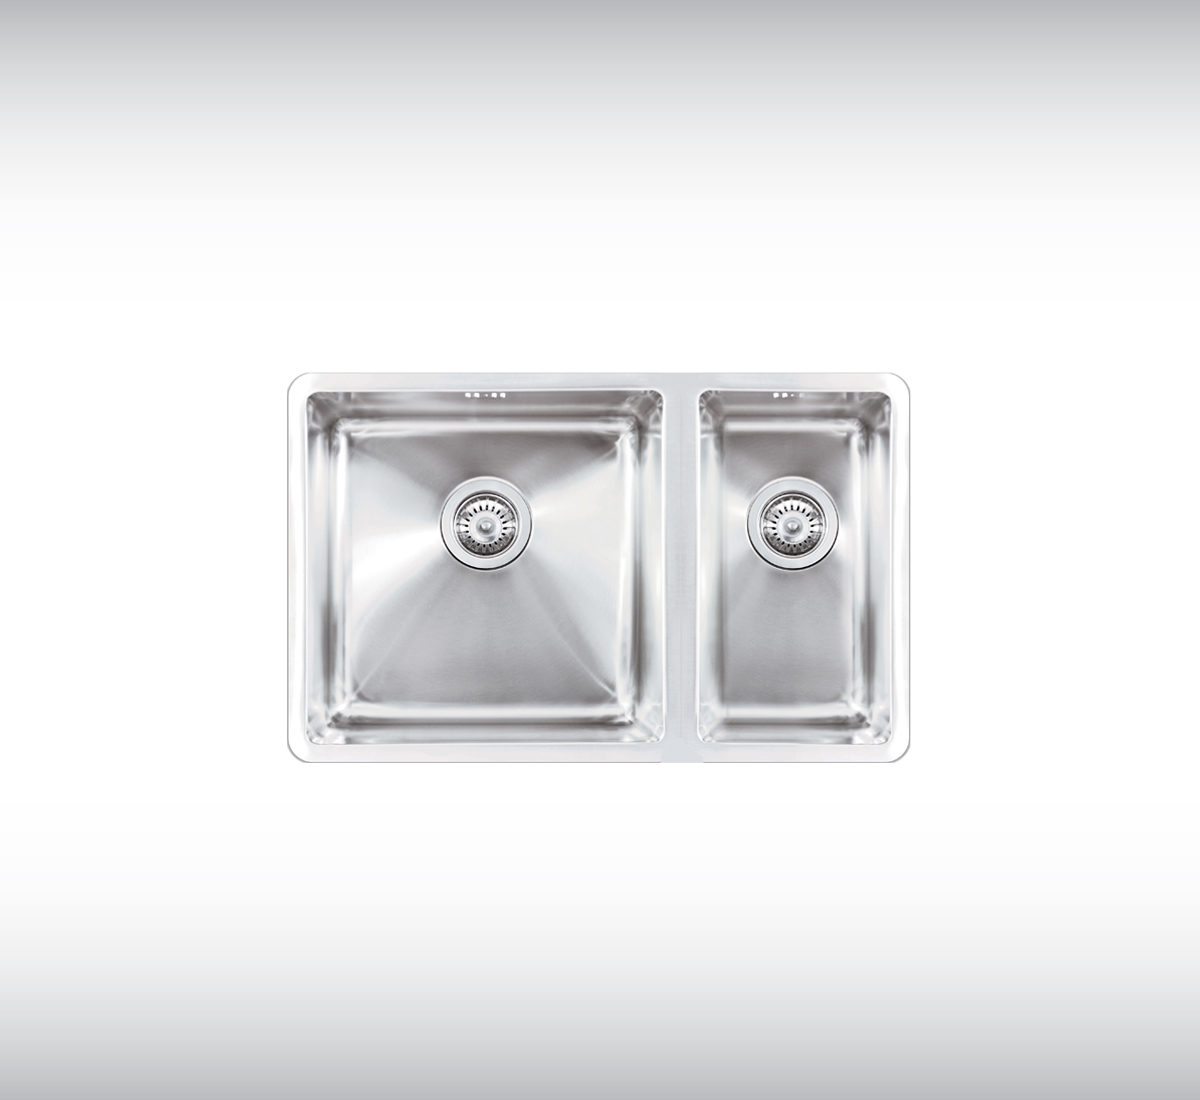 Stainless Steel Sink GINO-615L